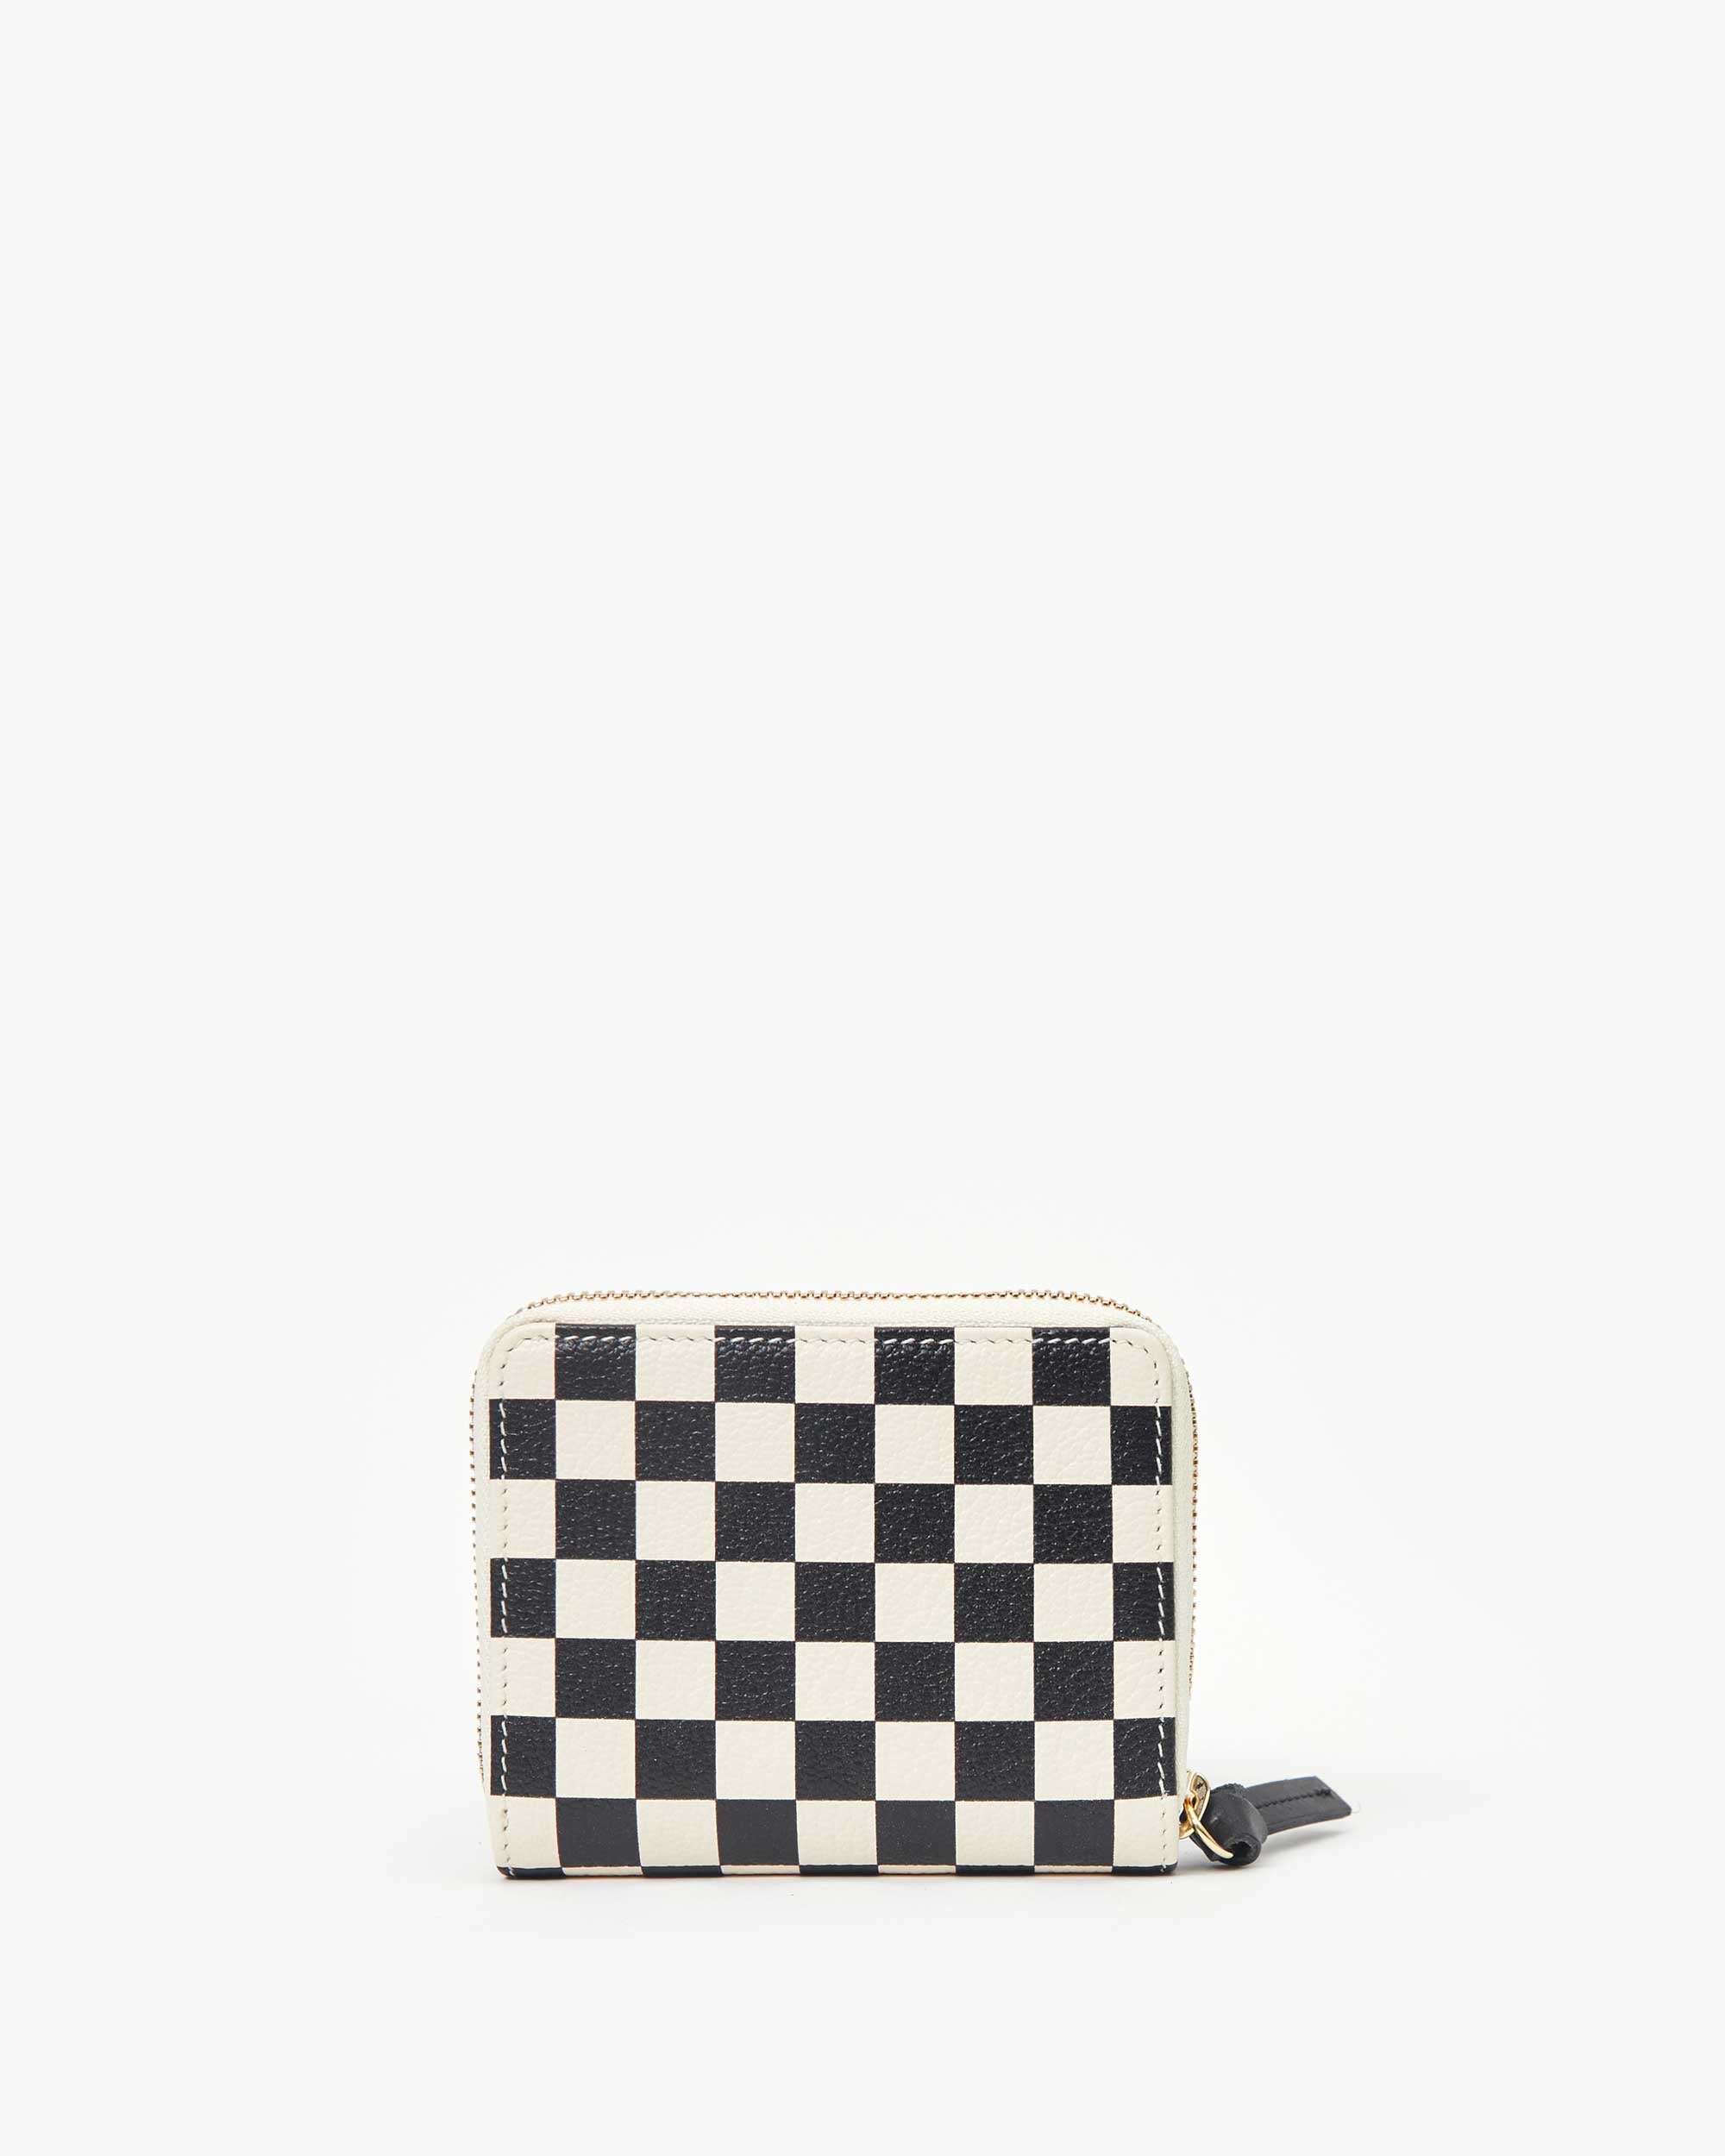 Clare V. Petit Zip Wallet Cuoio with Black & Cream